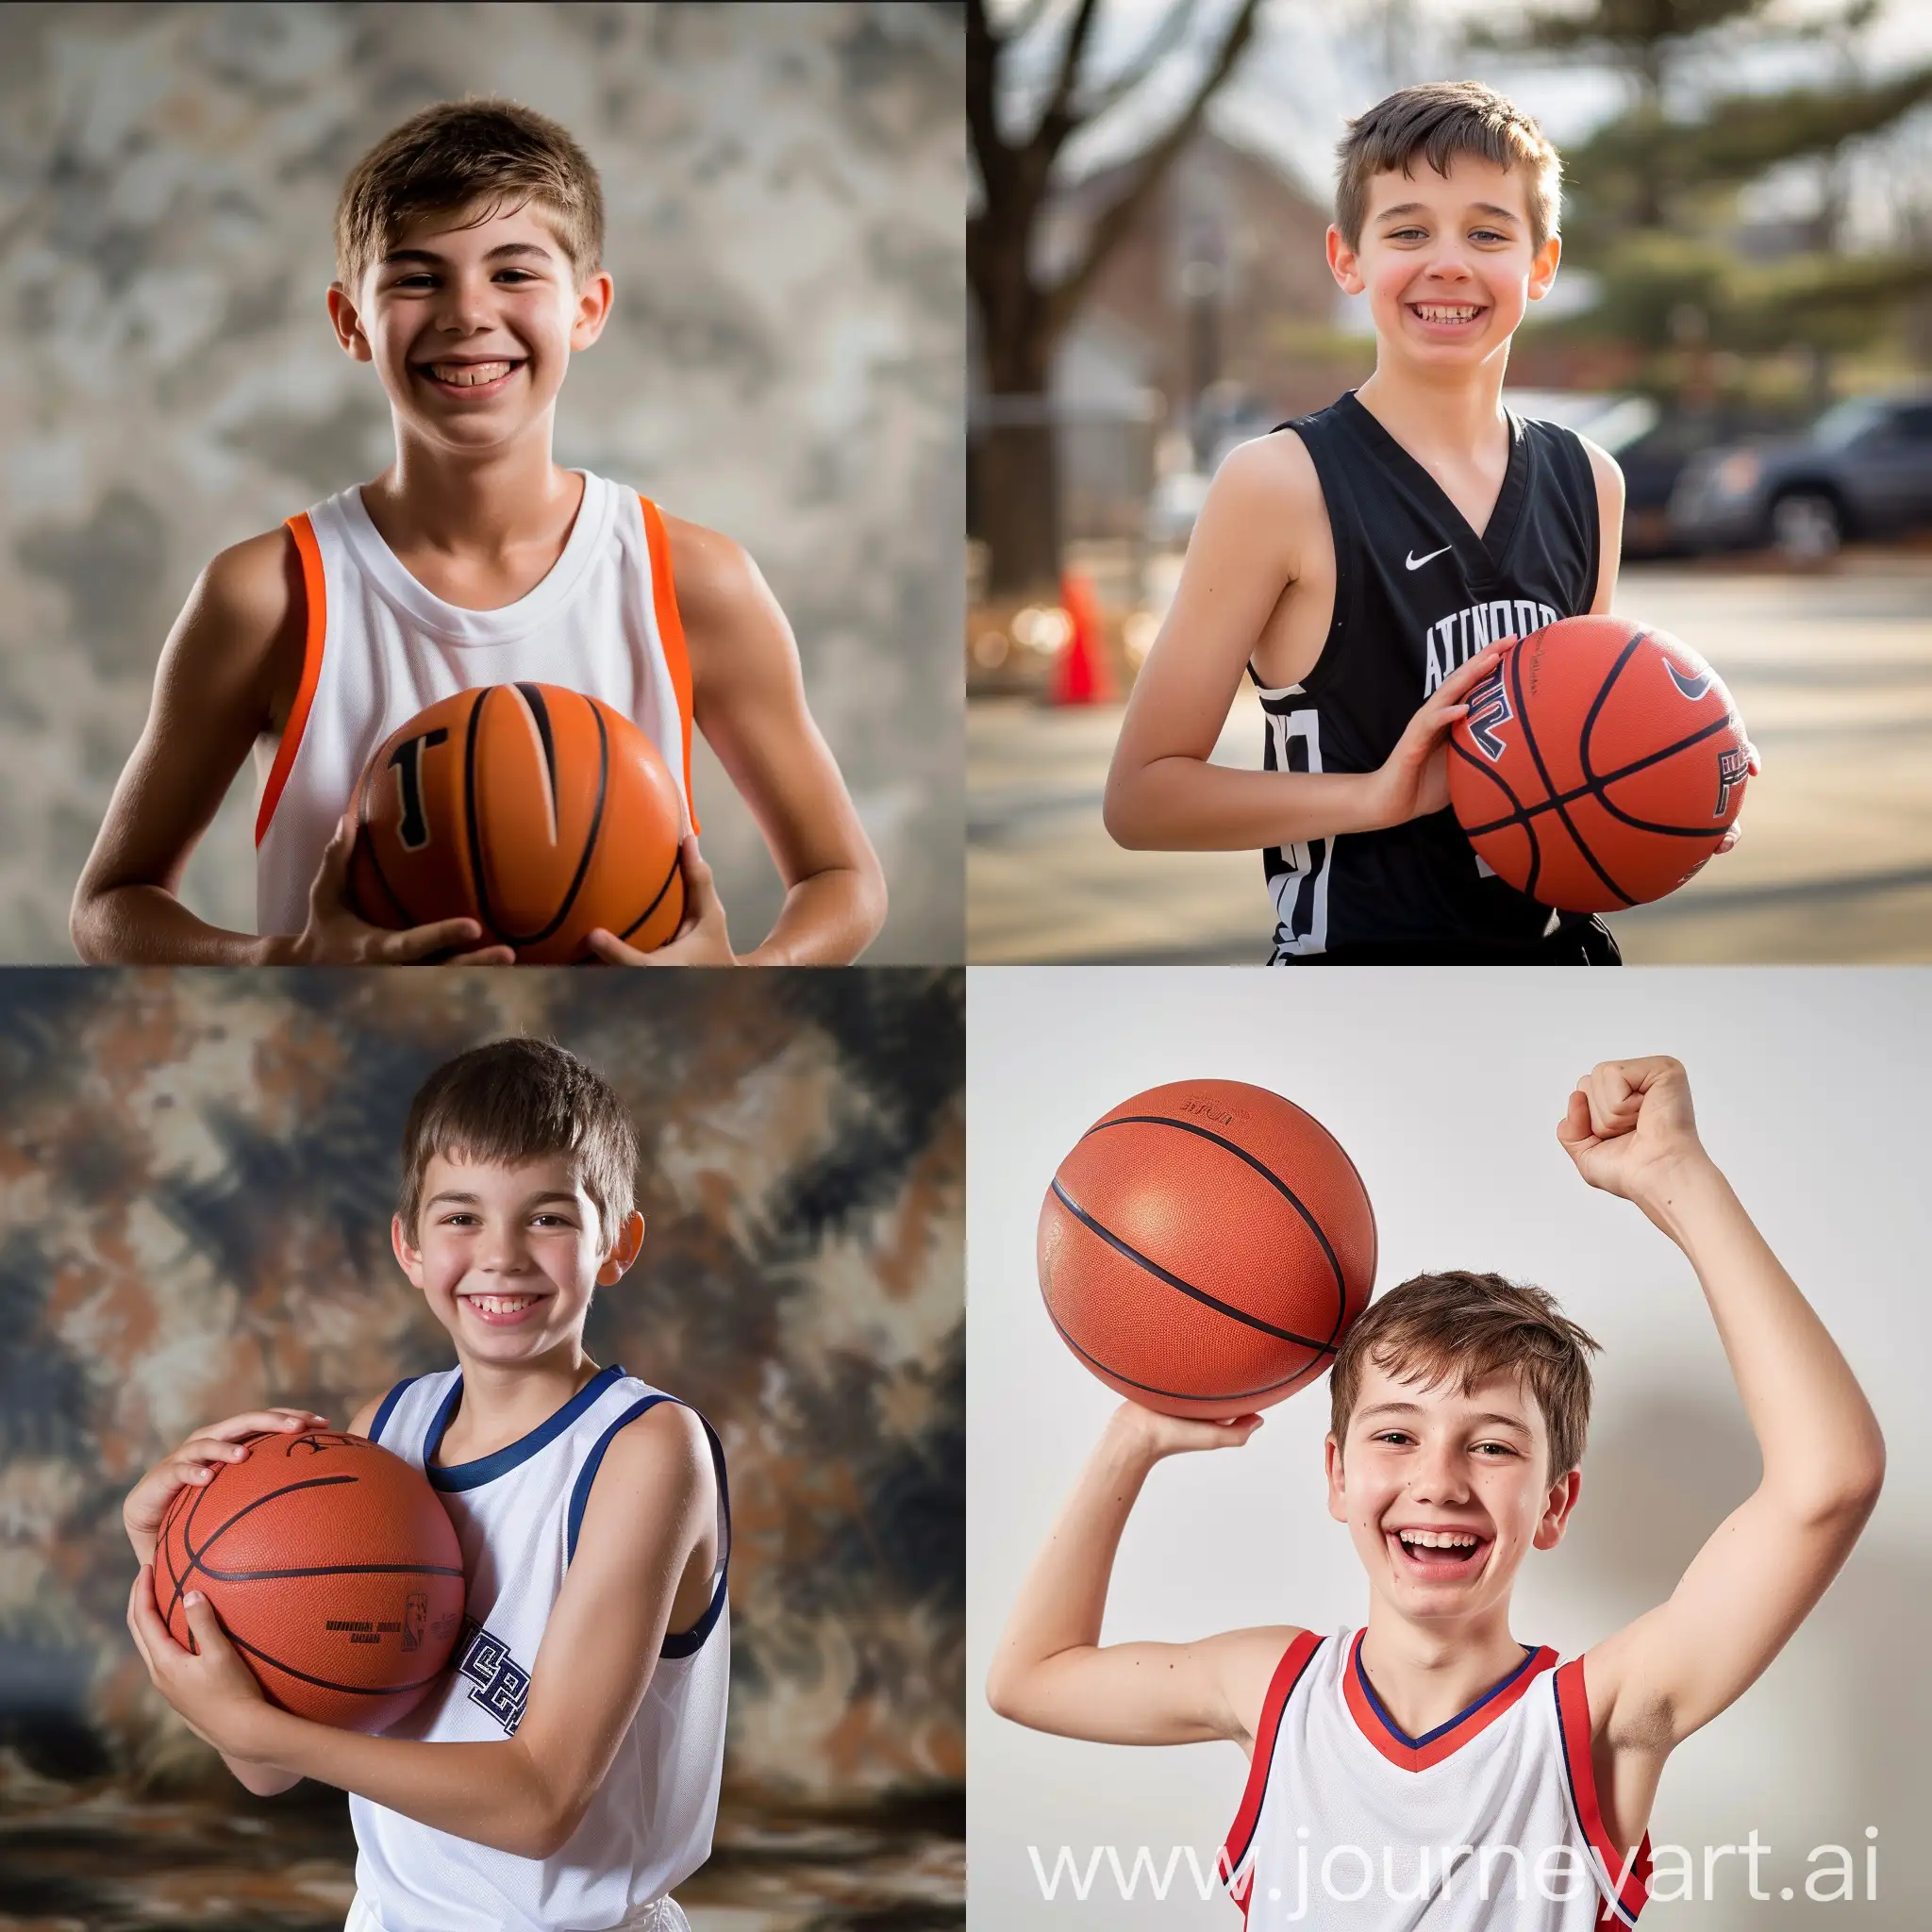 Cheerful-11YearOld-Basketball-Player-in-Spring-Celebration